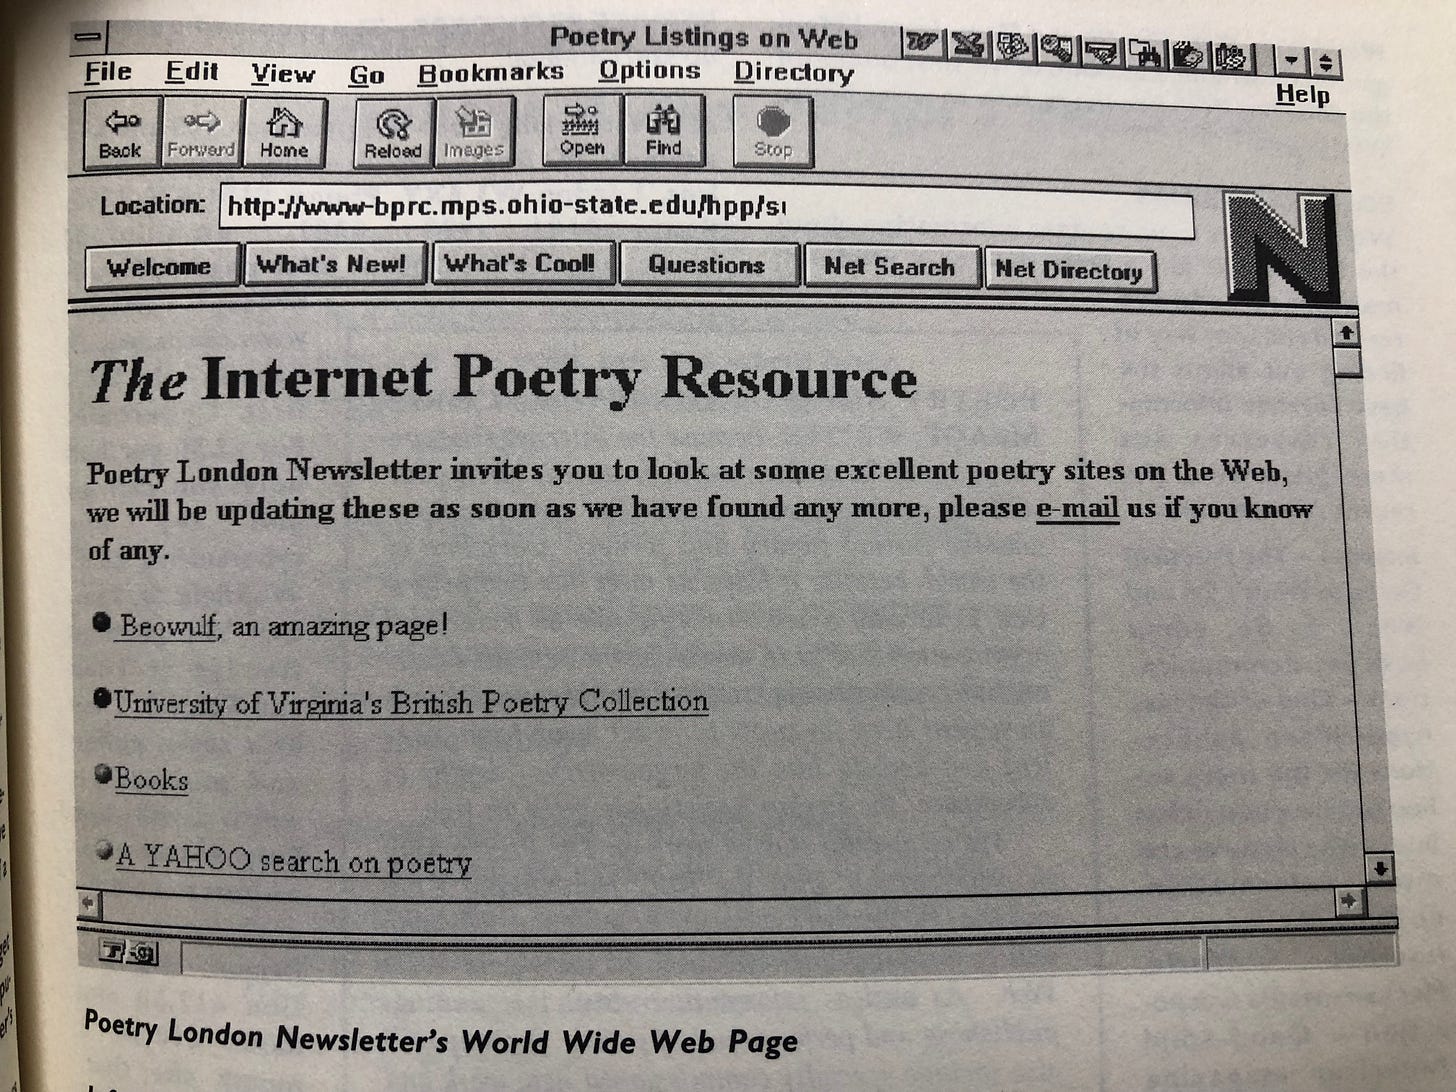 Mid-Nineties web browser displays message which begins: "Poetry London Newsletters invites you to look at some excellent poetry sites on the Web, we will be updating these as soon as we have found any more, please e-mail us if you know of any."